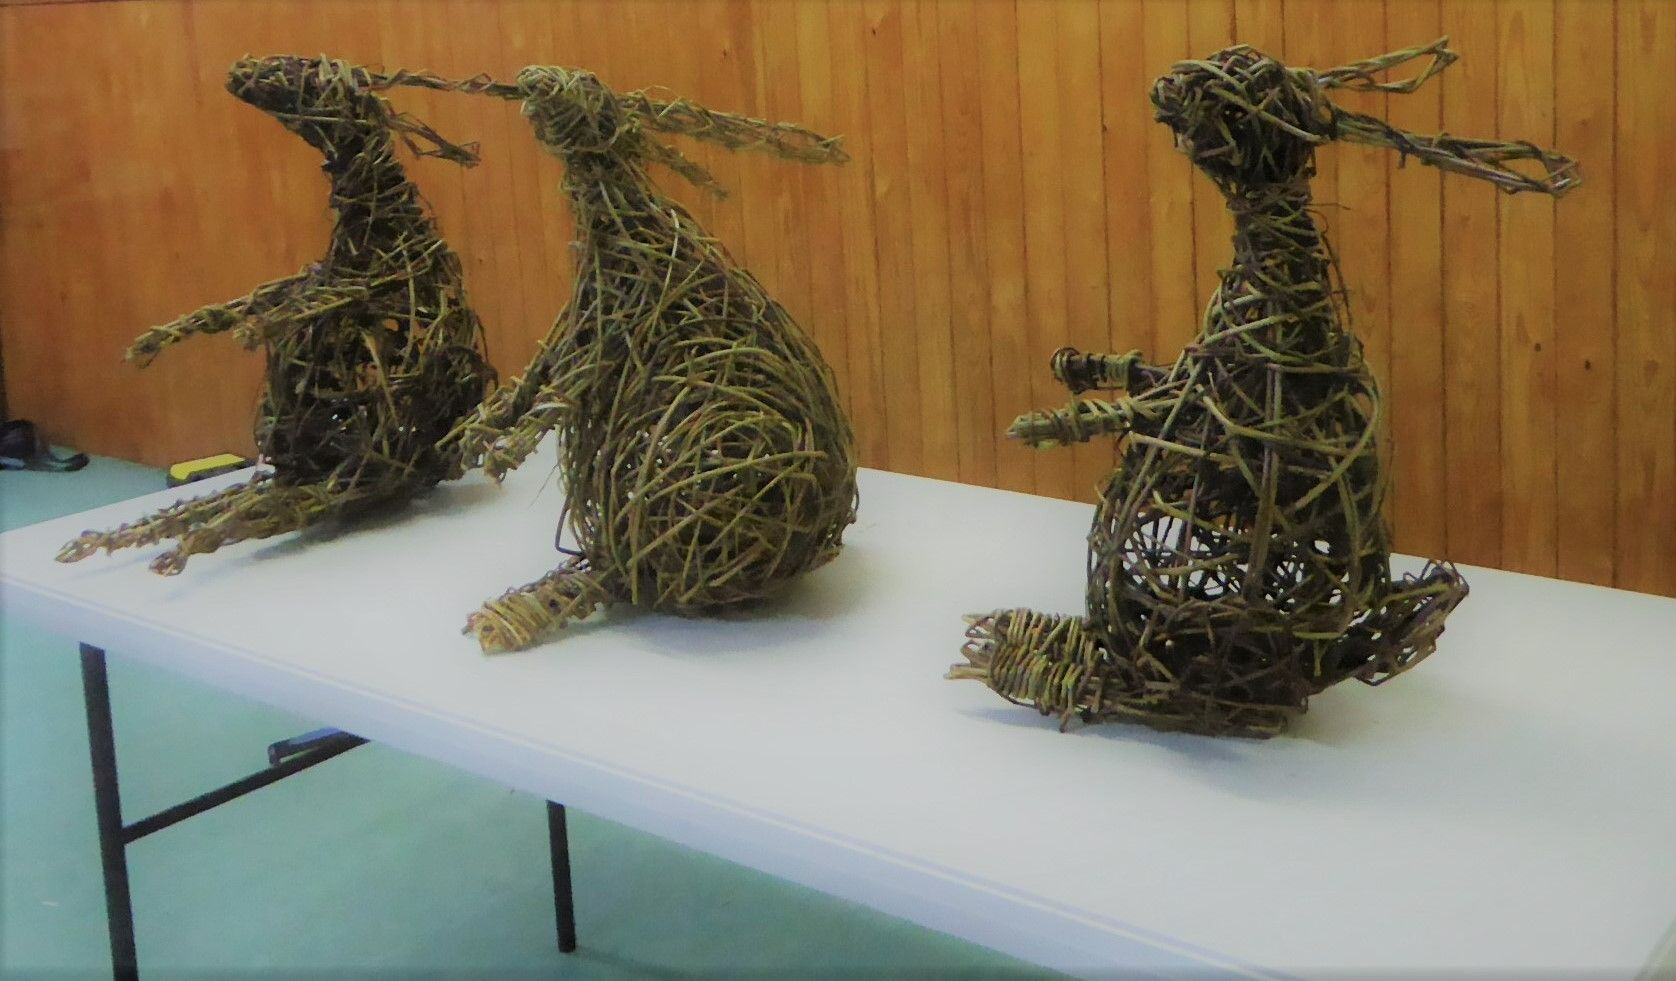 willow hare sculptures  from www.willow and crafts workshop